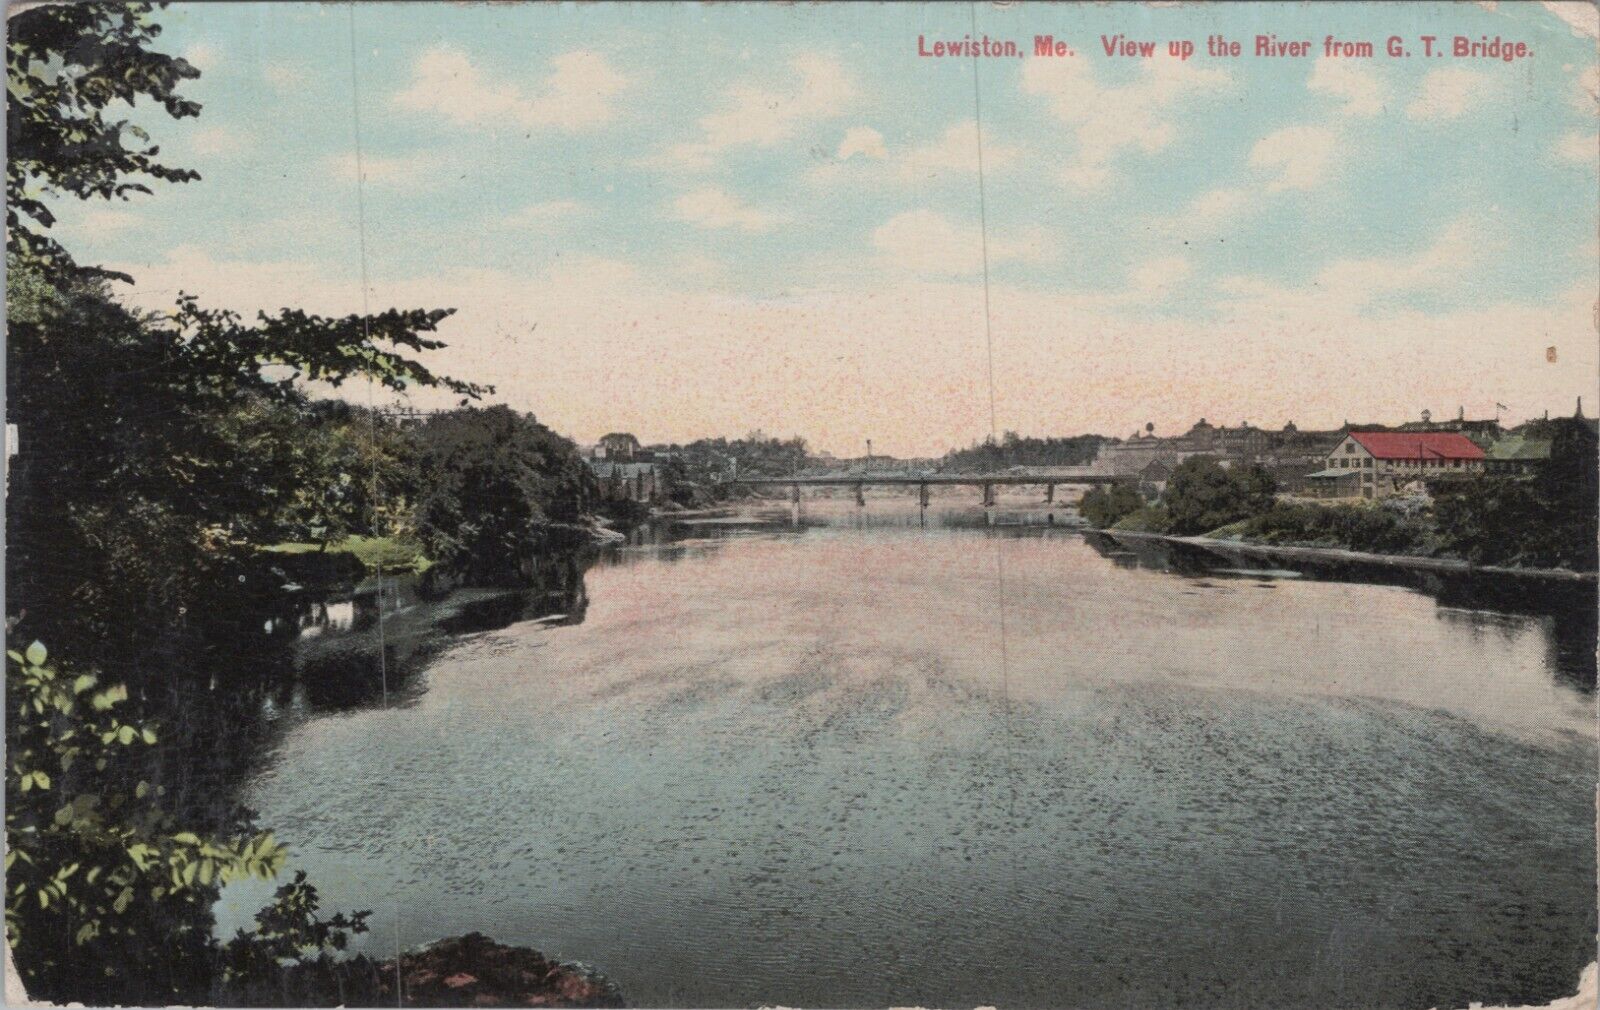 View Up the River from G. T. Bridge, Lewiston, Maine c1910s Postcard 7391.4